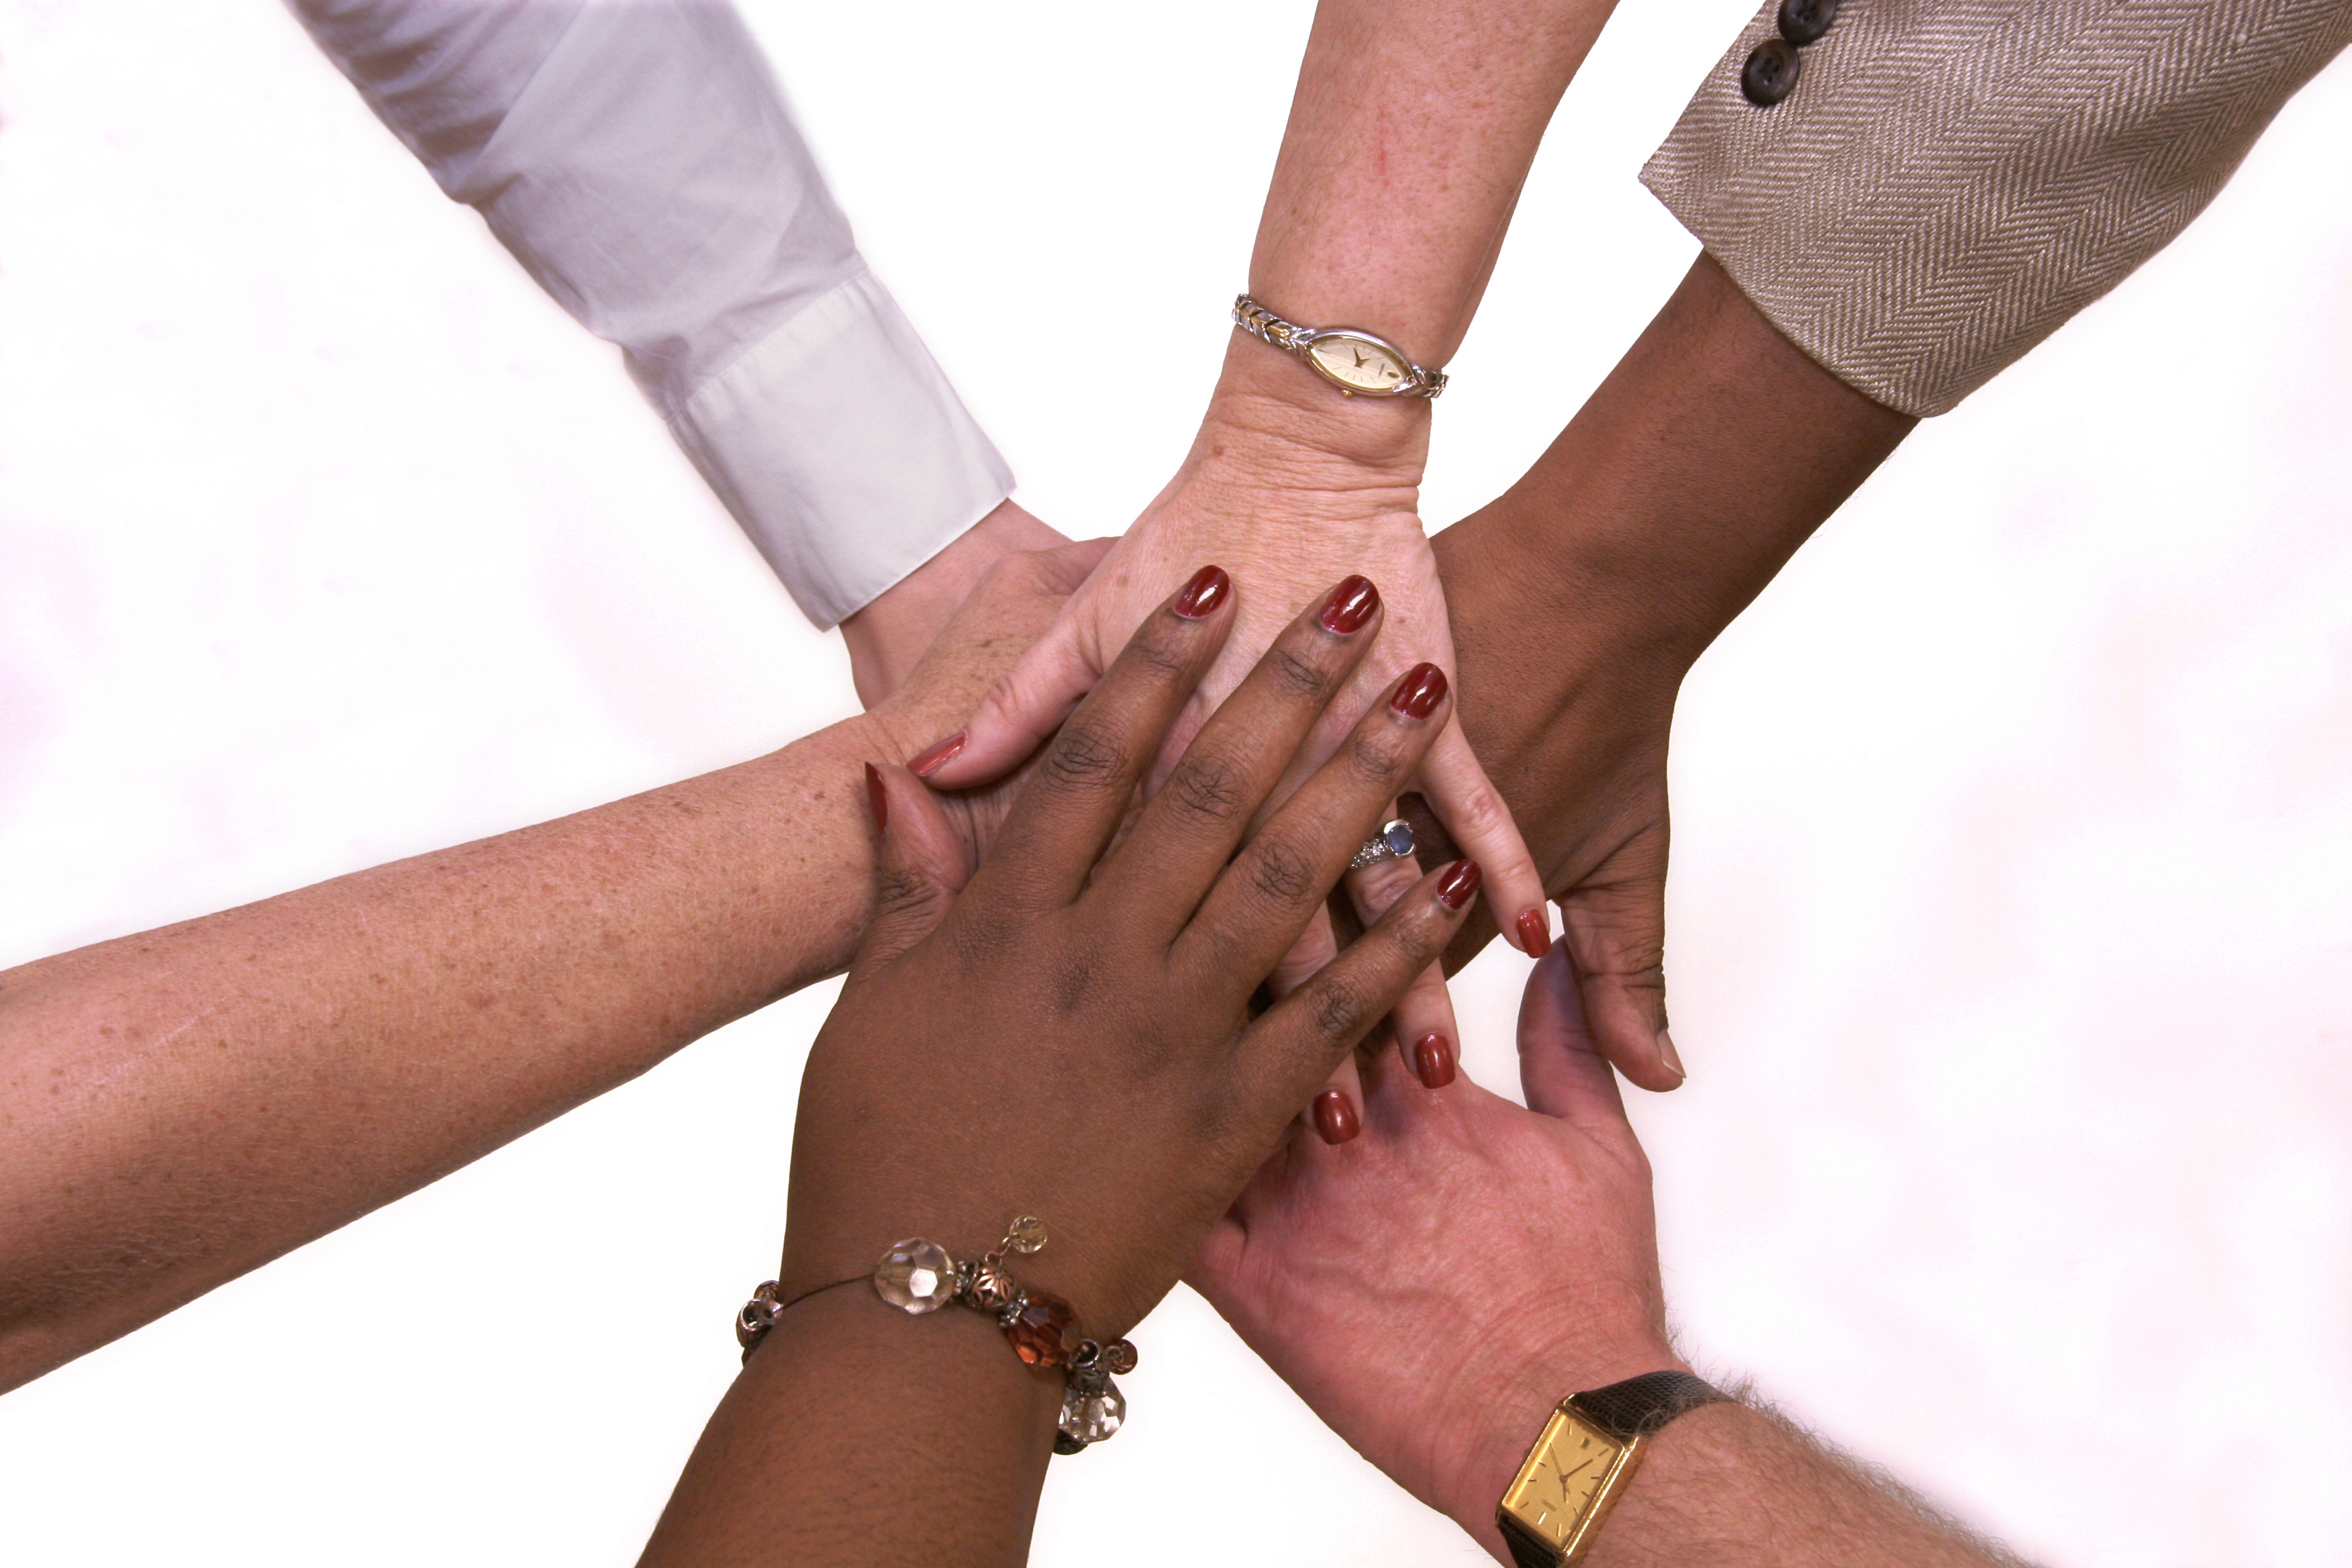 Members' hands at the center of a team circle for team handshake.